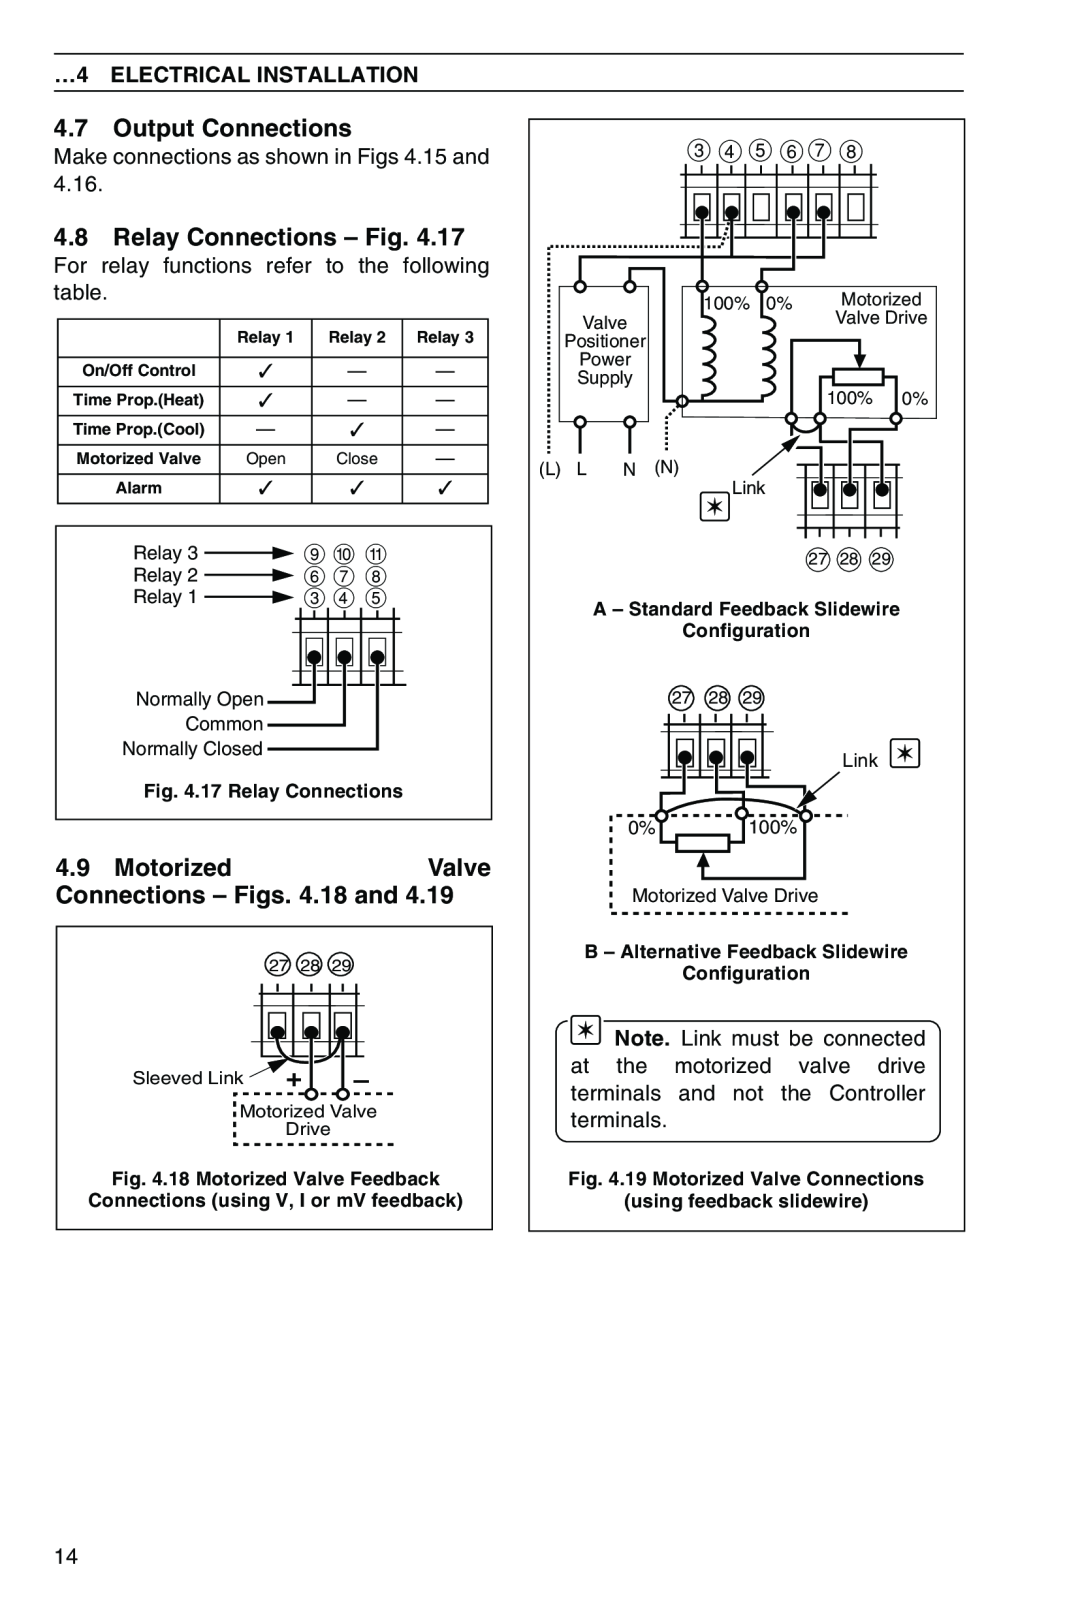 Omega CN3440 manual 4.7Output Connections, 4.8Relay Connections - Fig, Motorized, Valve, Connections - Figs. 4.18 and 